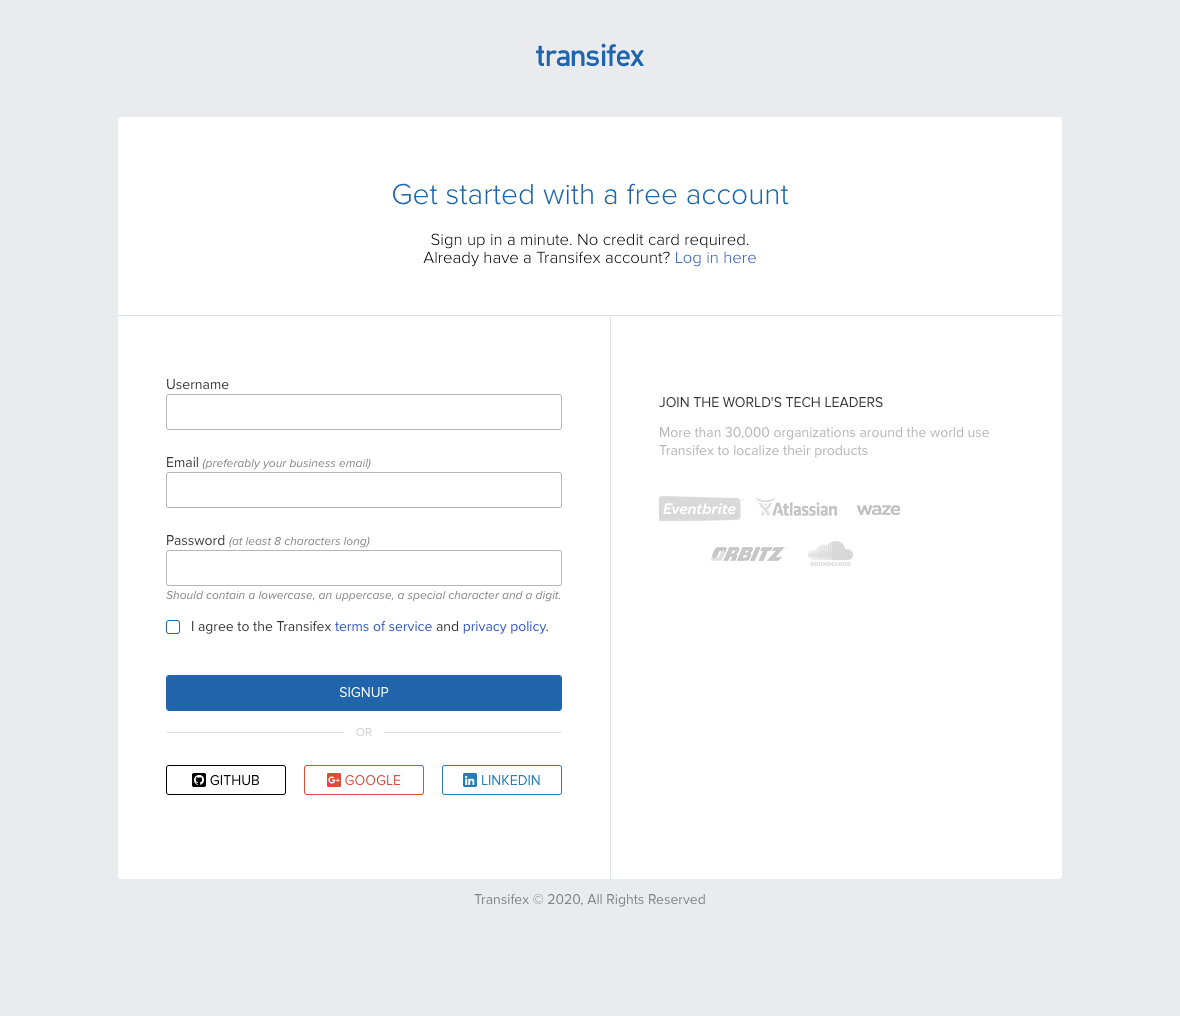 Screenshot of the Transifex sign up page